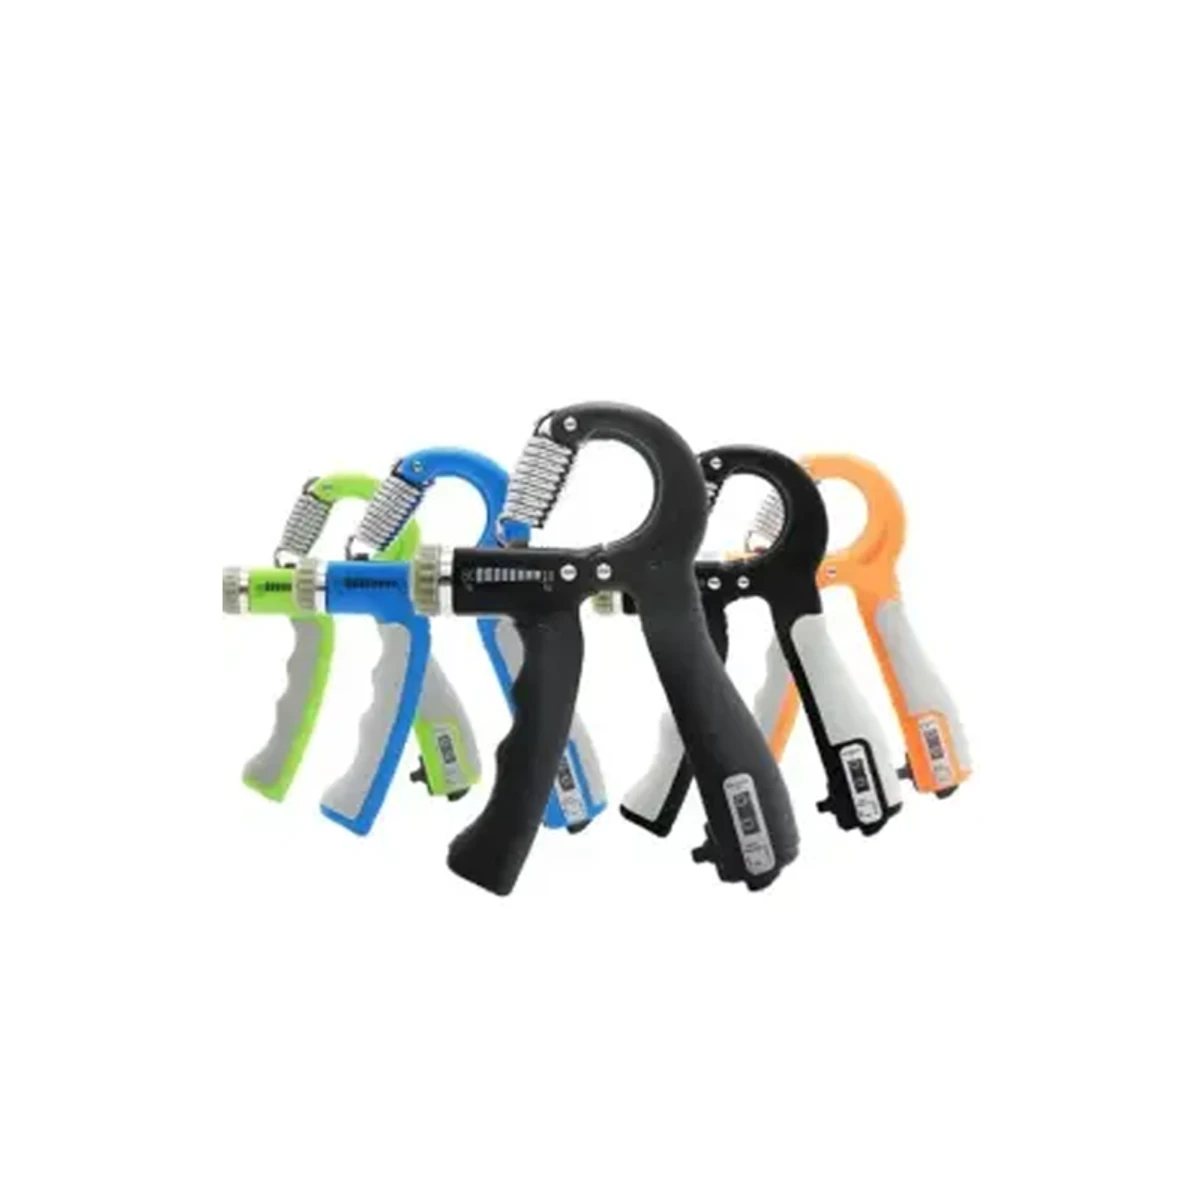 Adjustable Power Exercise Gripper Strengthener Hand Grip with Counter 5kg to 60kg Presser 1 pc